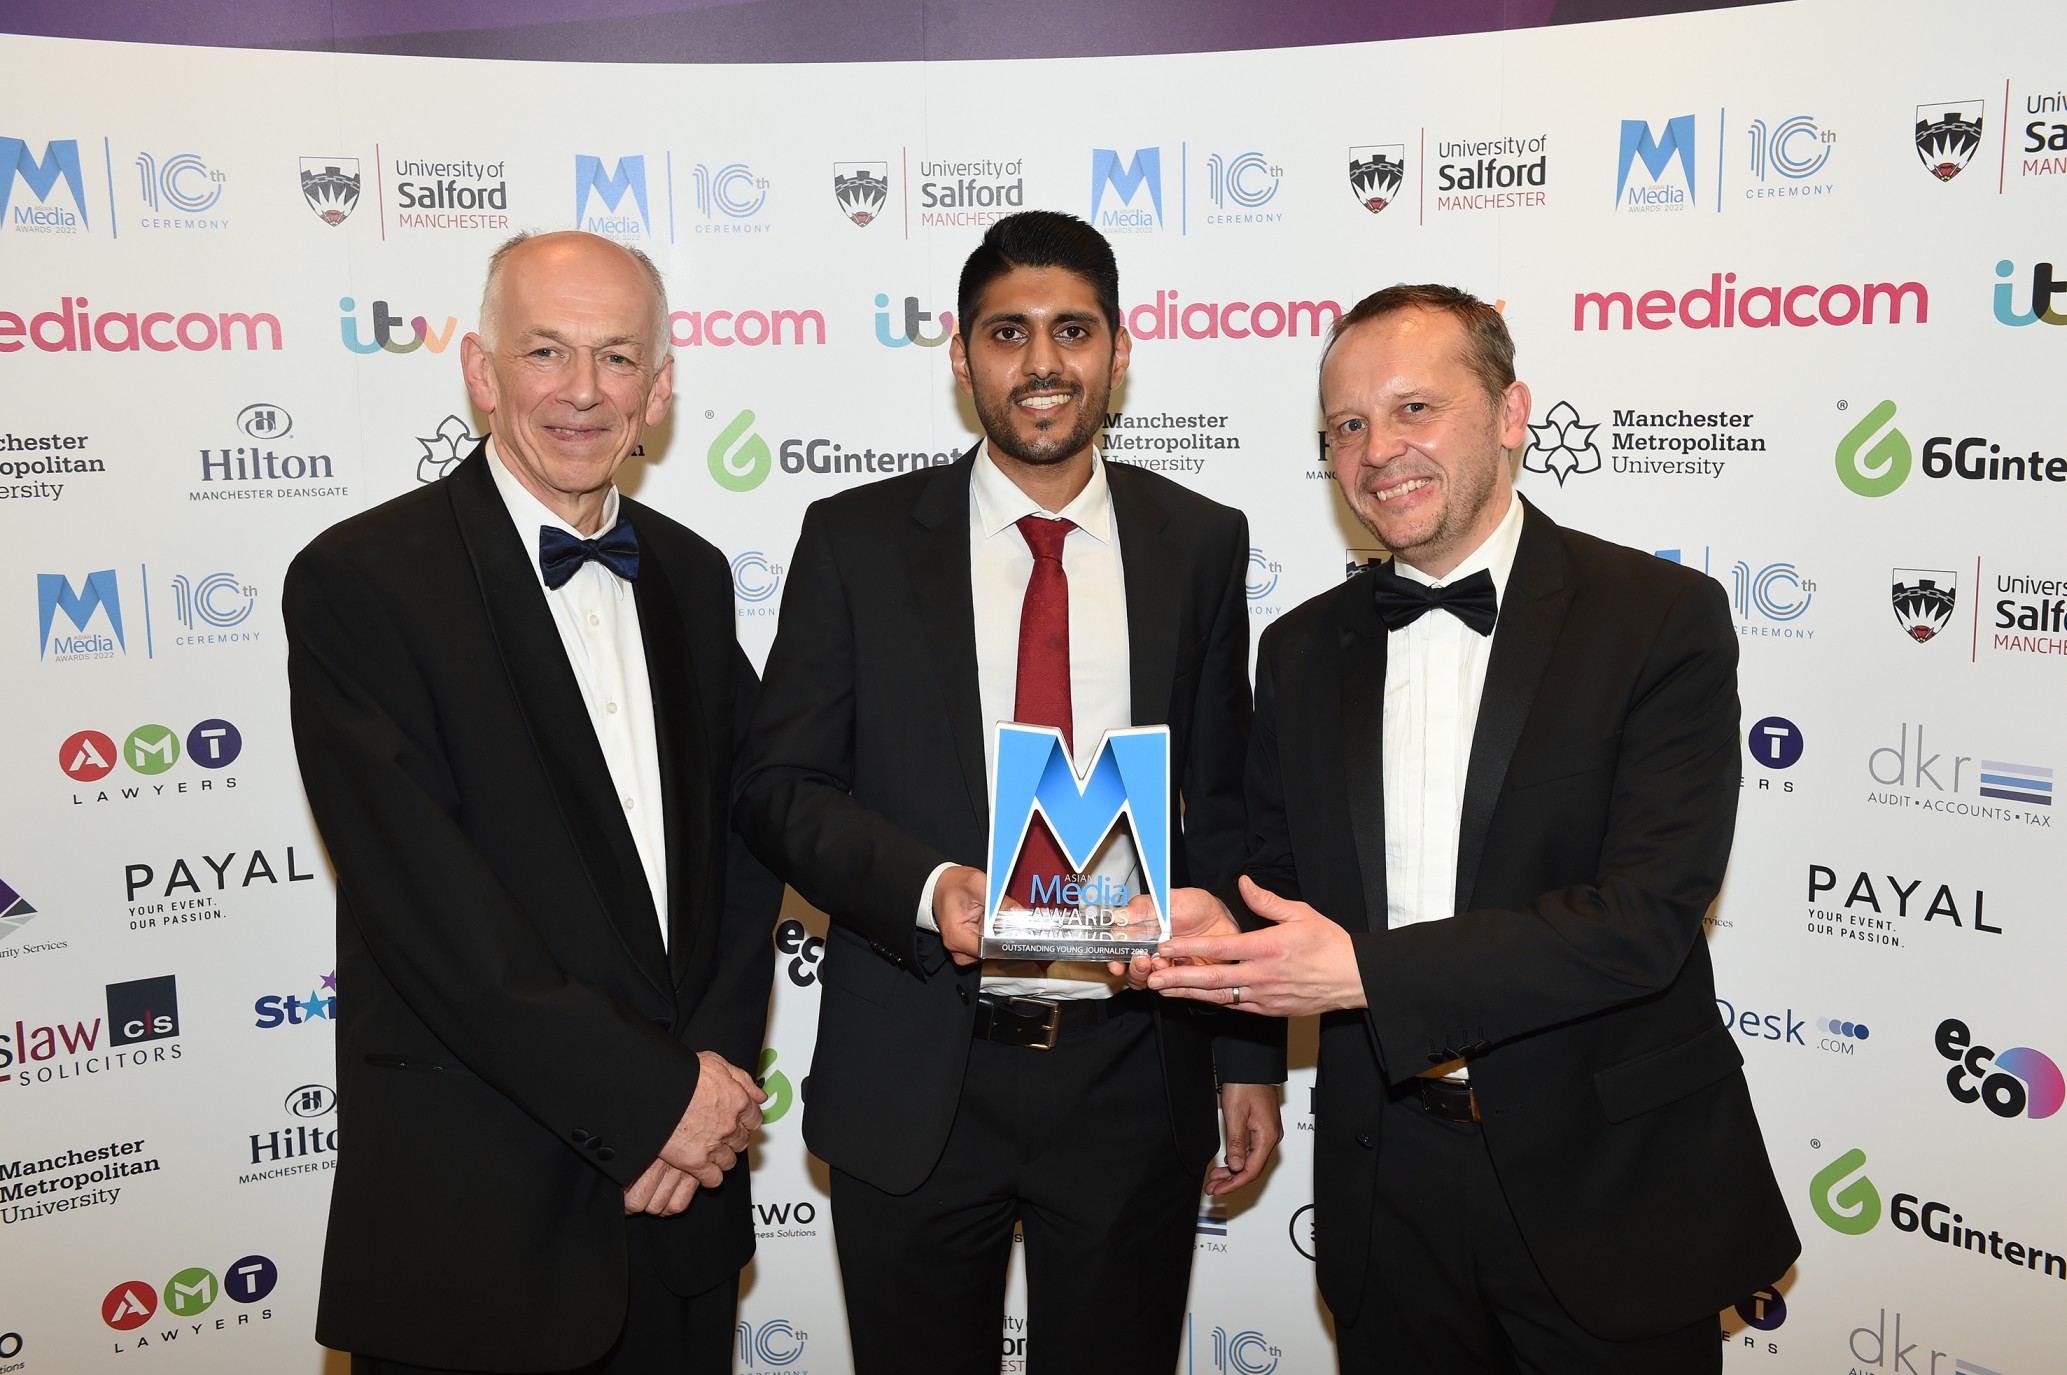 Issan Khan presented with his award by Professor Allan Walker and Paul Broster of the University of Salford 